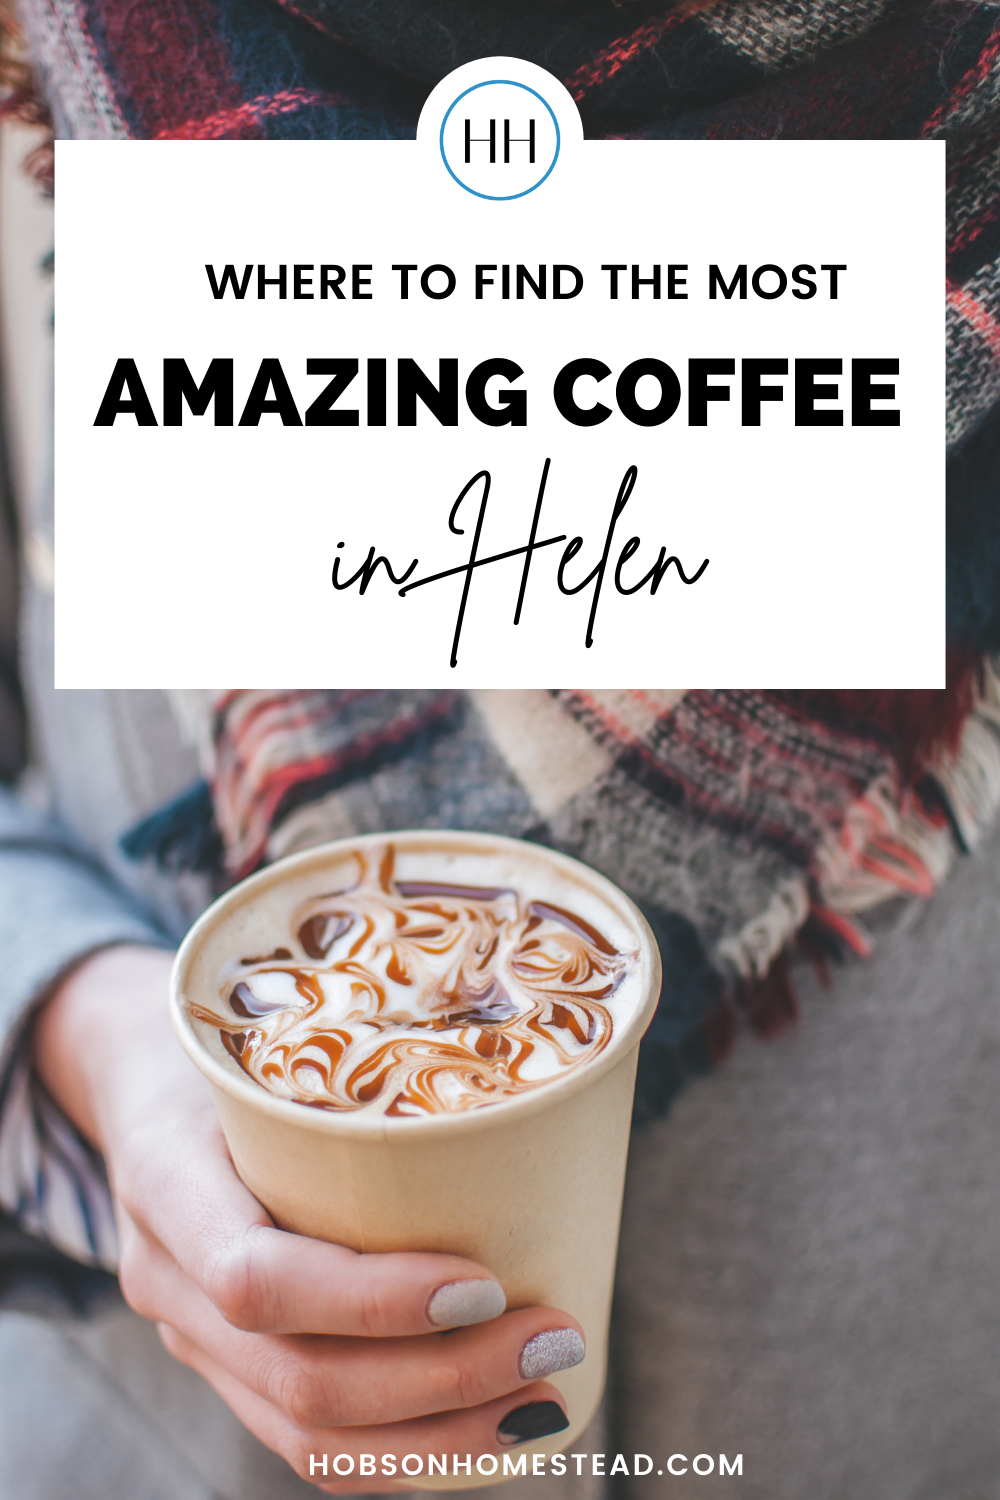 If you're looking for the best coffee in Helen, try out one of these delicious coffee shops for a cup of fresh-brewed joe.